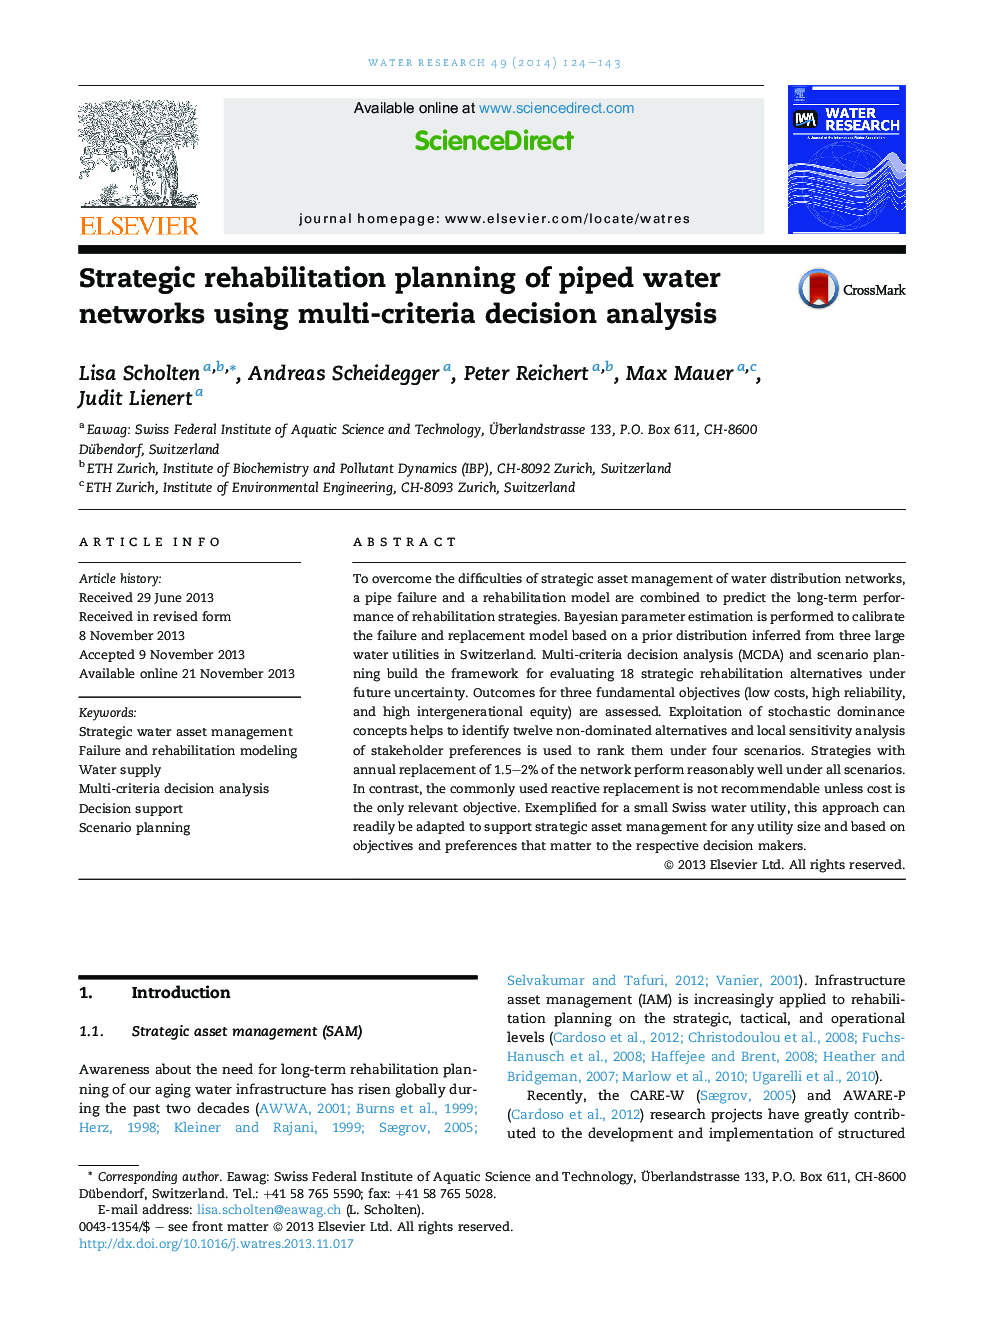 Strategic rehabilitation planning of piped water networks using multi-criteria decision analysis